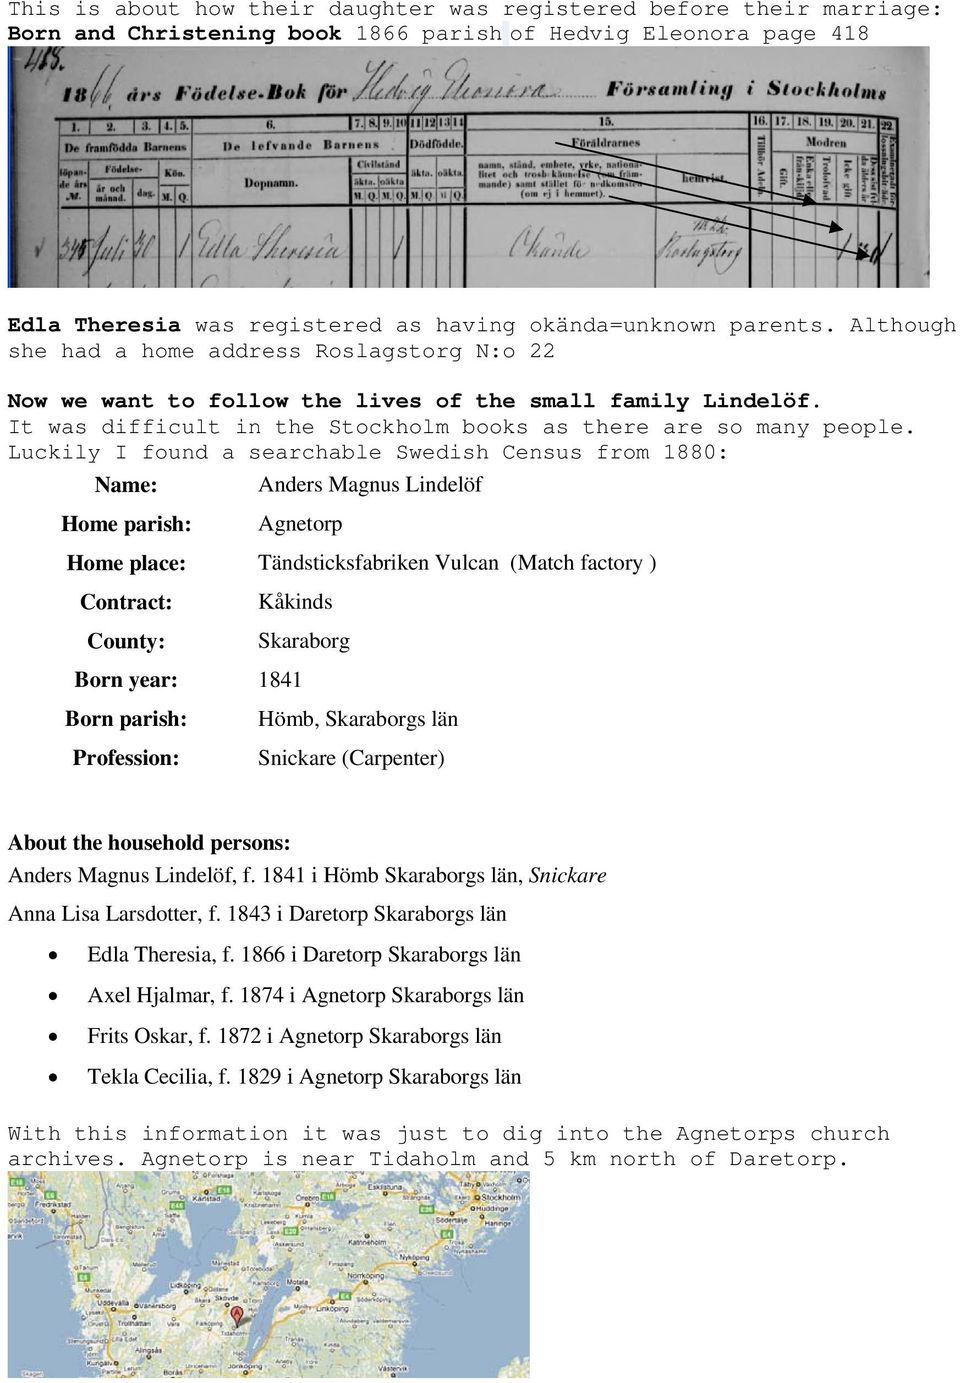 Luckily I found a searchable Swedish Census from 1880: Name: Anders Magnus Lindelöf Home parish: Agnetorp Home place: Tändsticksfabriken Vulcan (Match factory ) Contract: Kåkinds County: Skaraborg